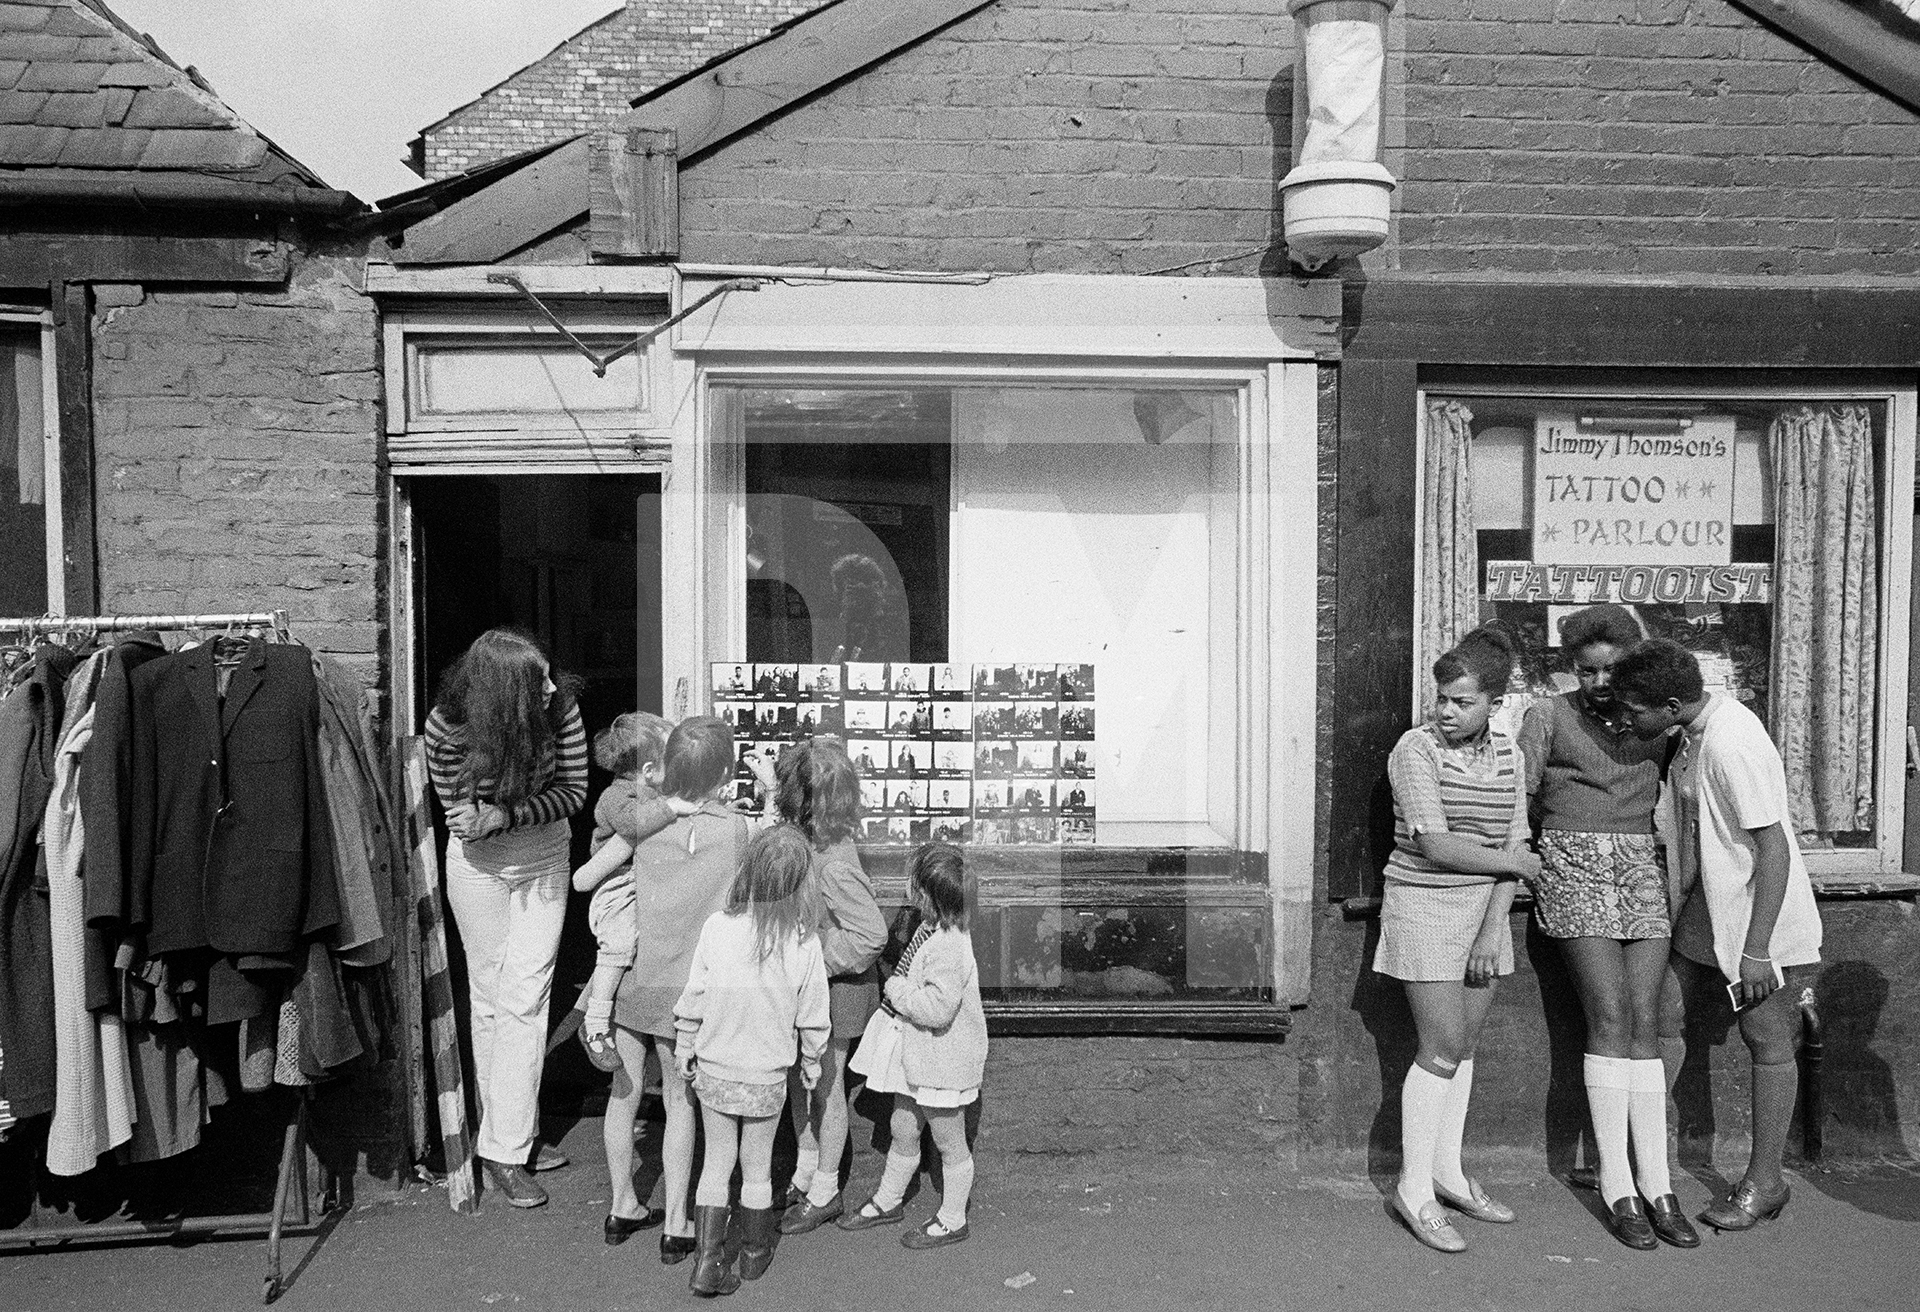 The Free Photographic Shop at no.79B Greame Street, Moss Side, Manchester. February-April 1972 by Daniel Meadows